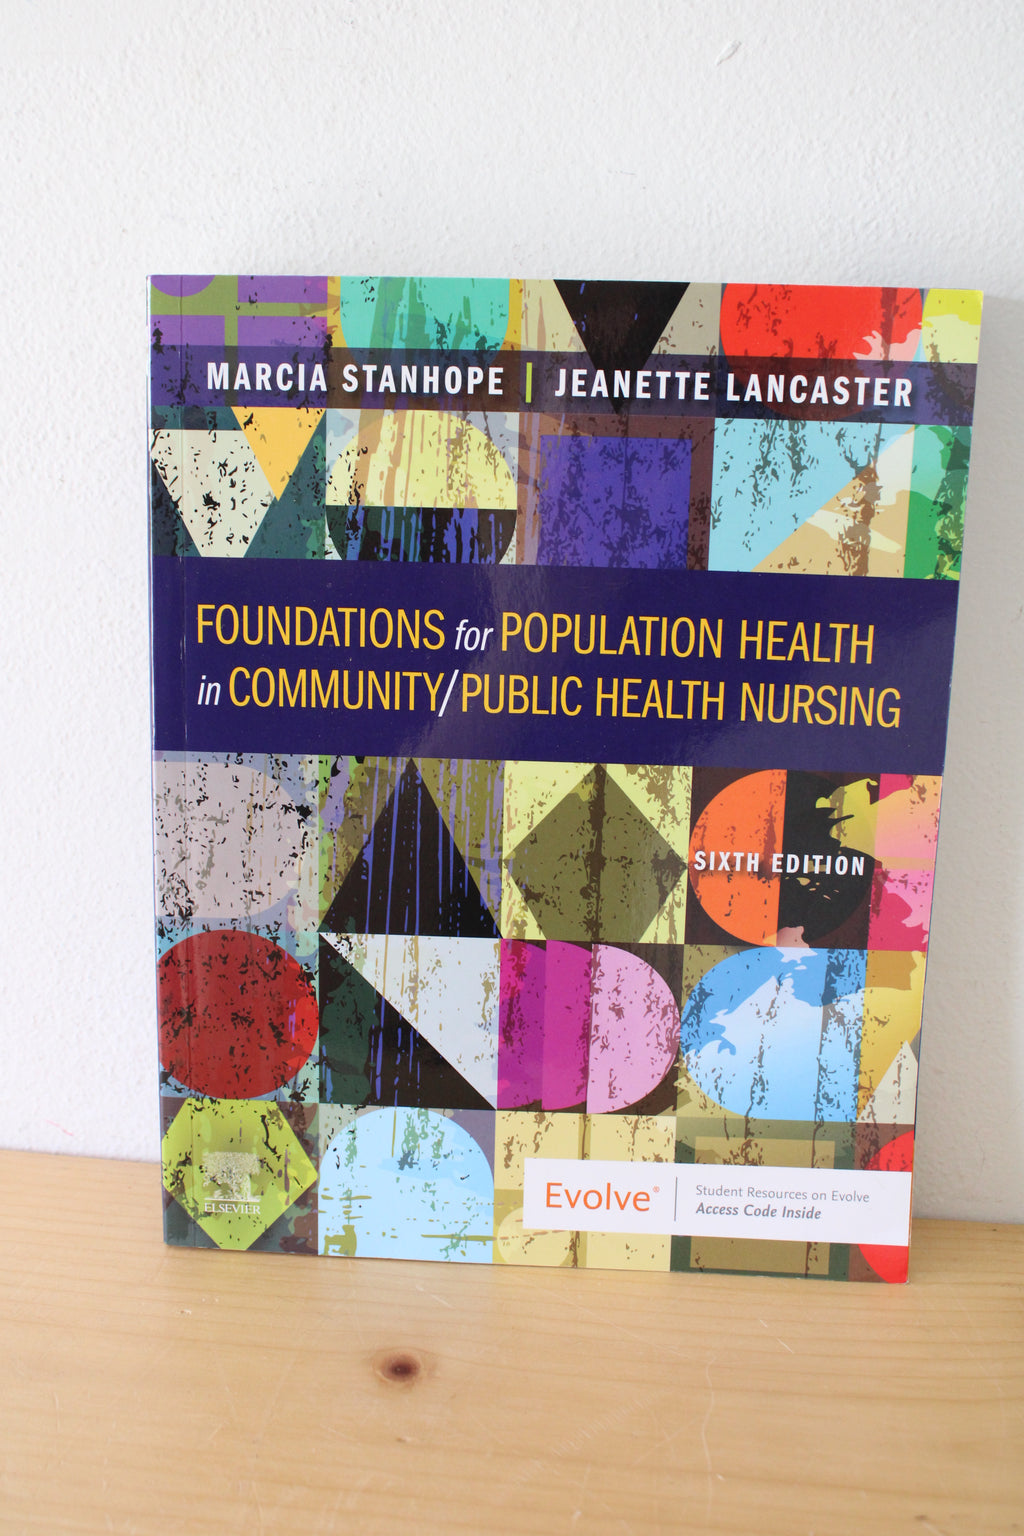 Foundations For Population Health In Community/Public Health Nursing By Marcia Stanhope And Jeanette Lancaster, Sixth Edition